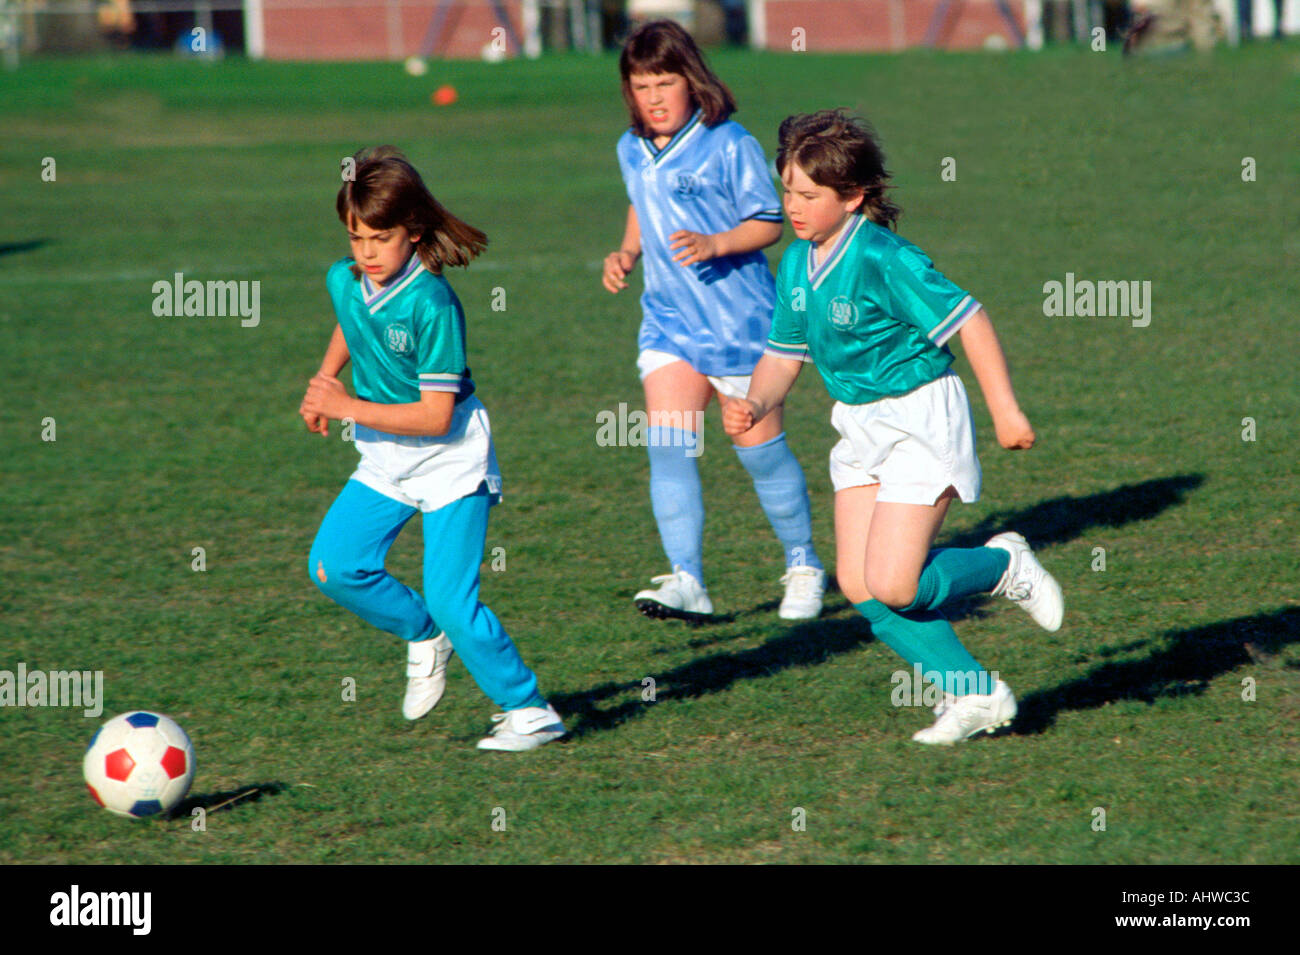 Girls 9 to 11 years old play organized soccer Stock Photo